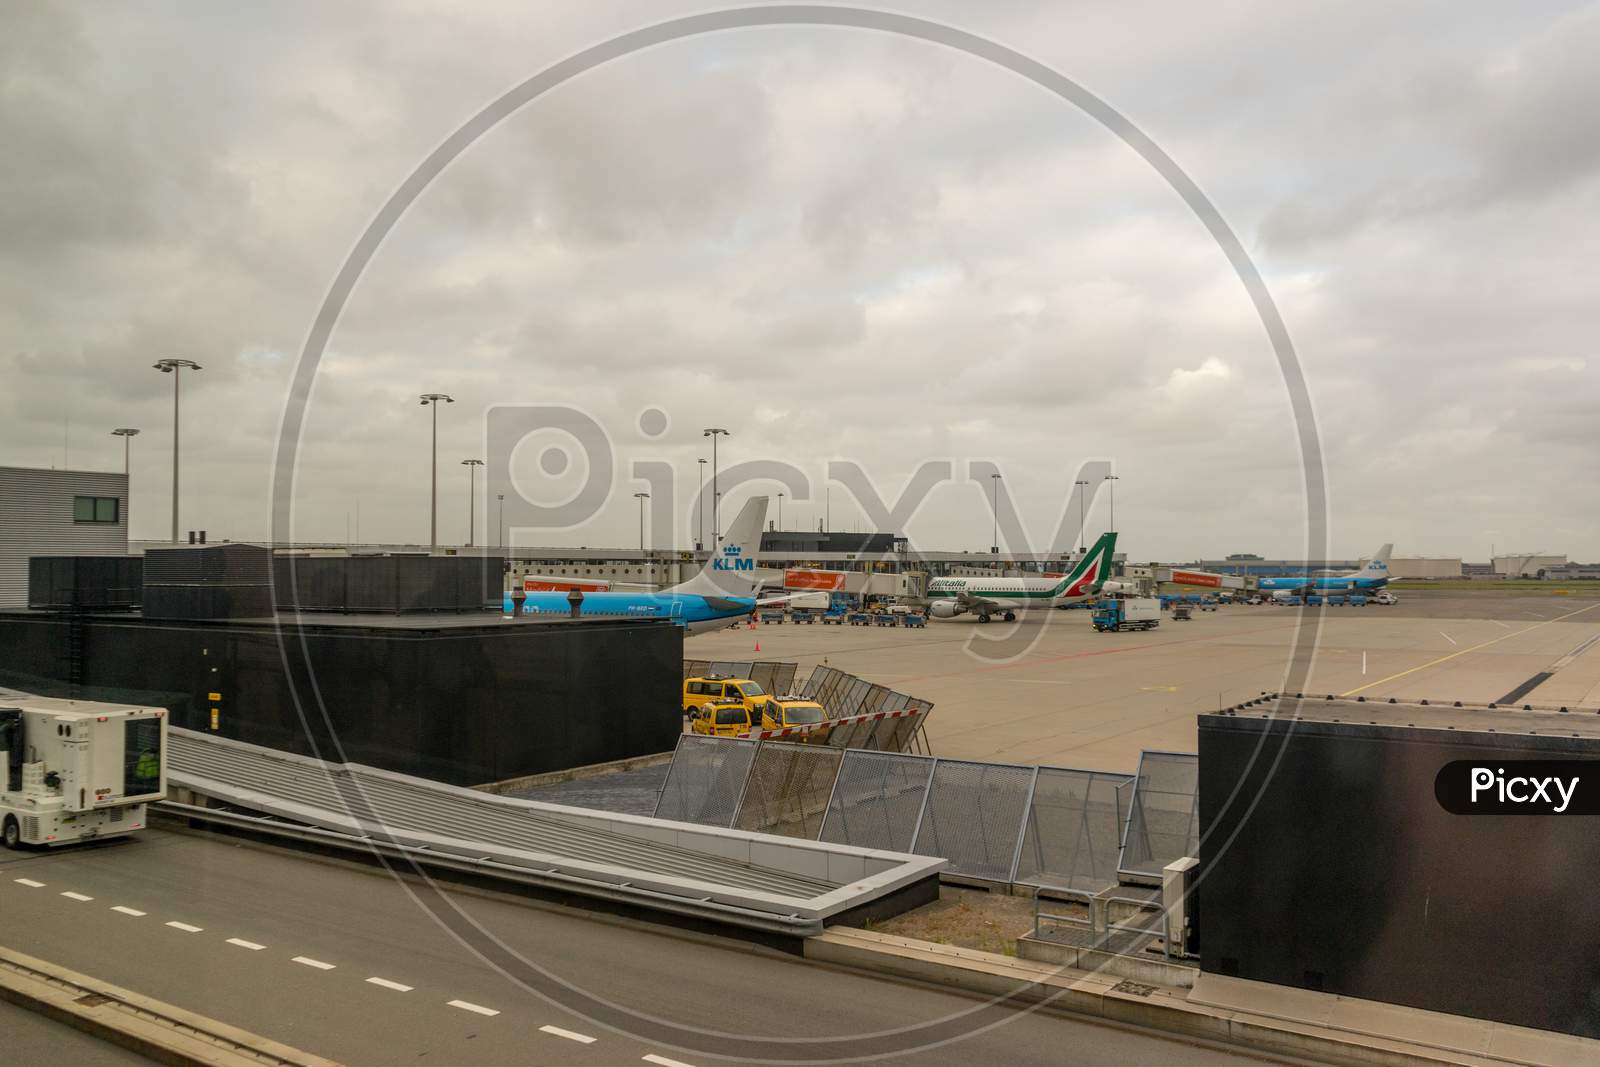 Amsterdam, Schiphol - 22 June 2018: Klm And Alitalia Planes At The Schiphol Airport